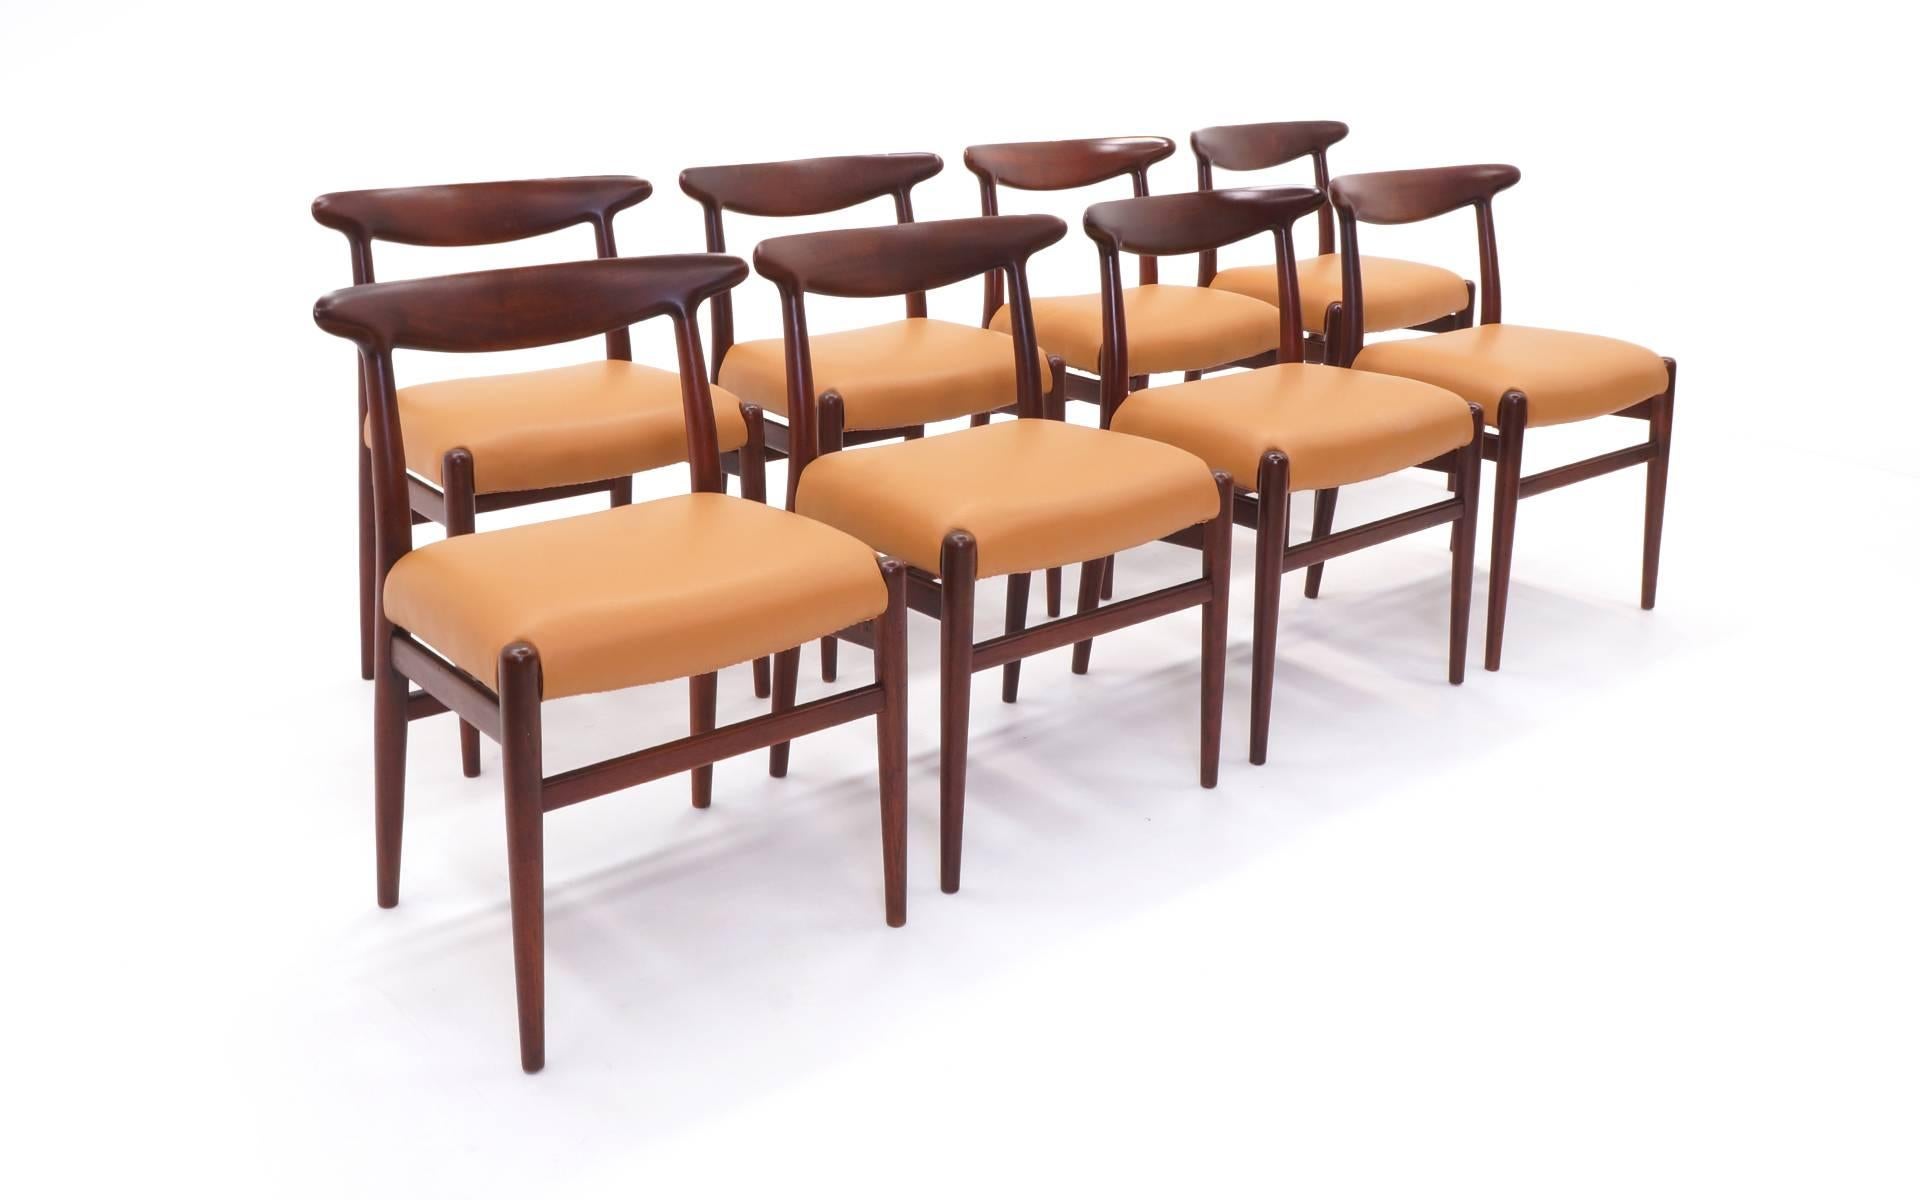 Set of eight Hans Wegner dining chairs, C.M. Madsens Fabriker, Denmark, 1953. Stained teak with new camel color leather. Signed with partial stamped manufacturer's mark to frame of each example: [C.M. Madsen Fabriker Haarby Danmark made in Denmark